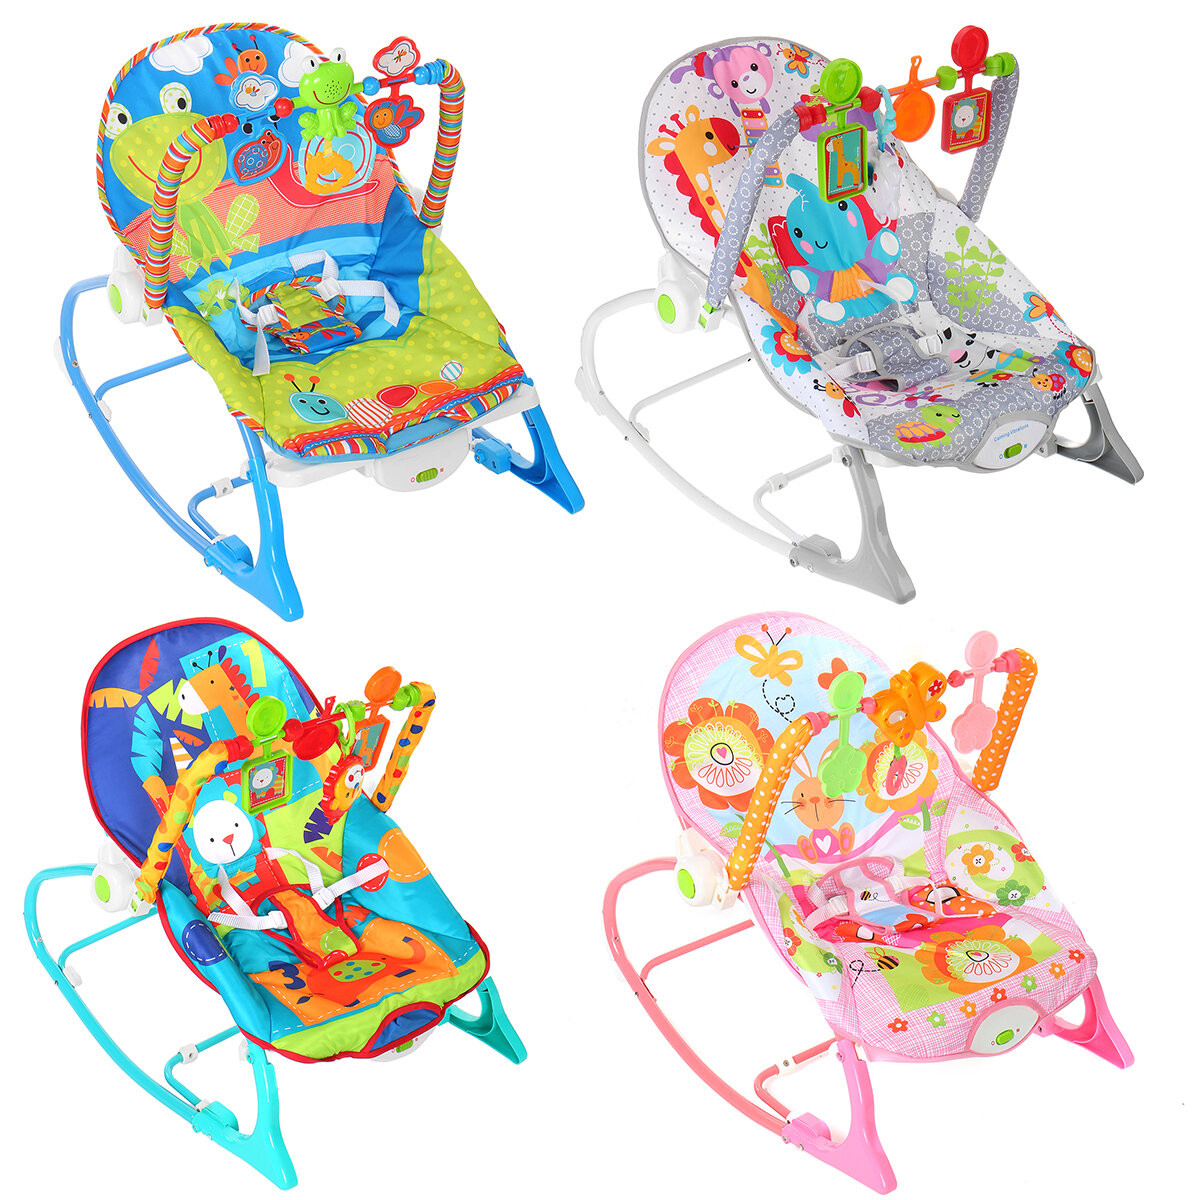 Image of Multifunctional Lightweight Baby Cradling Chair Music Vibration Infant-to-Toddler Rocking Chair